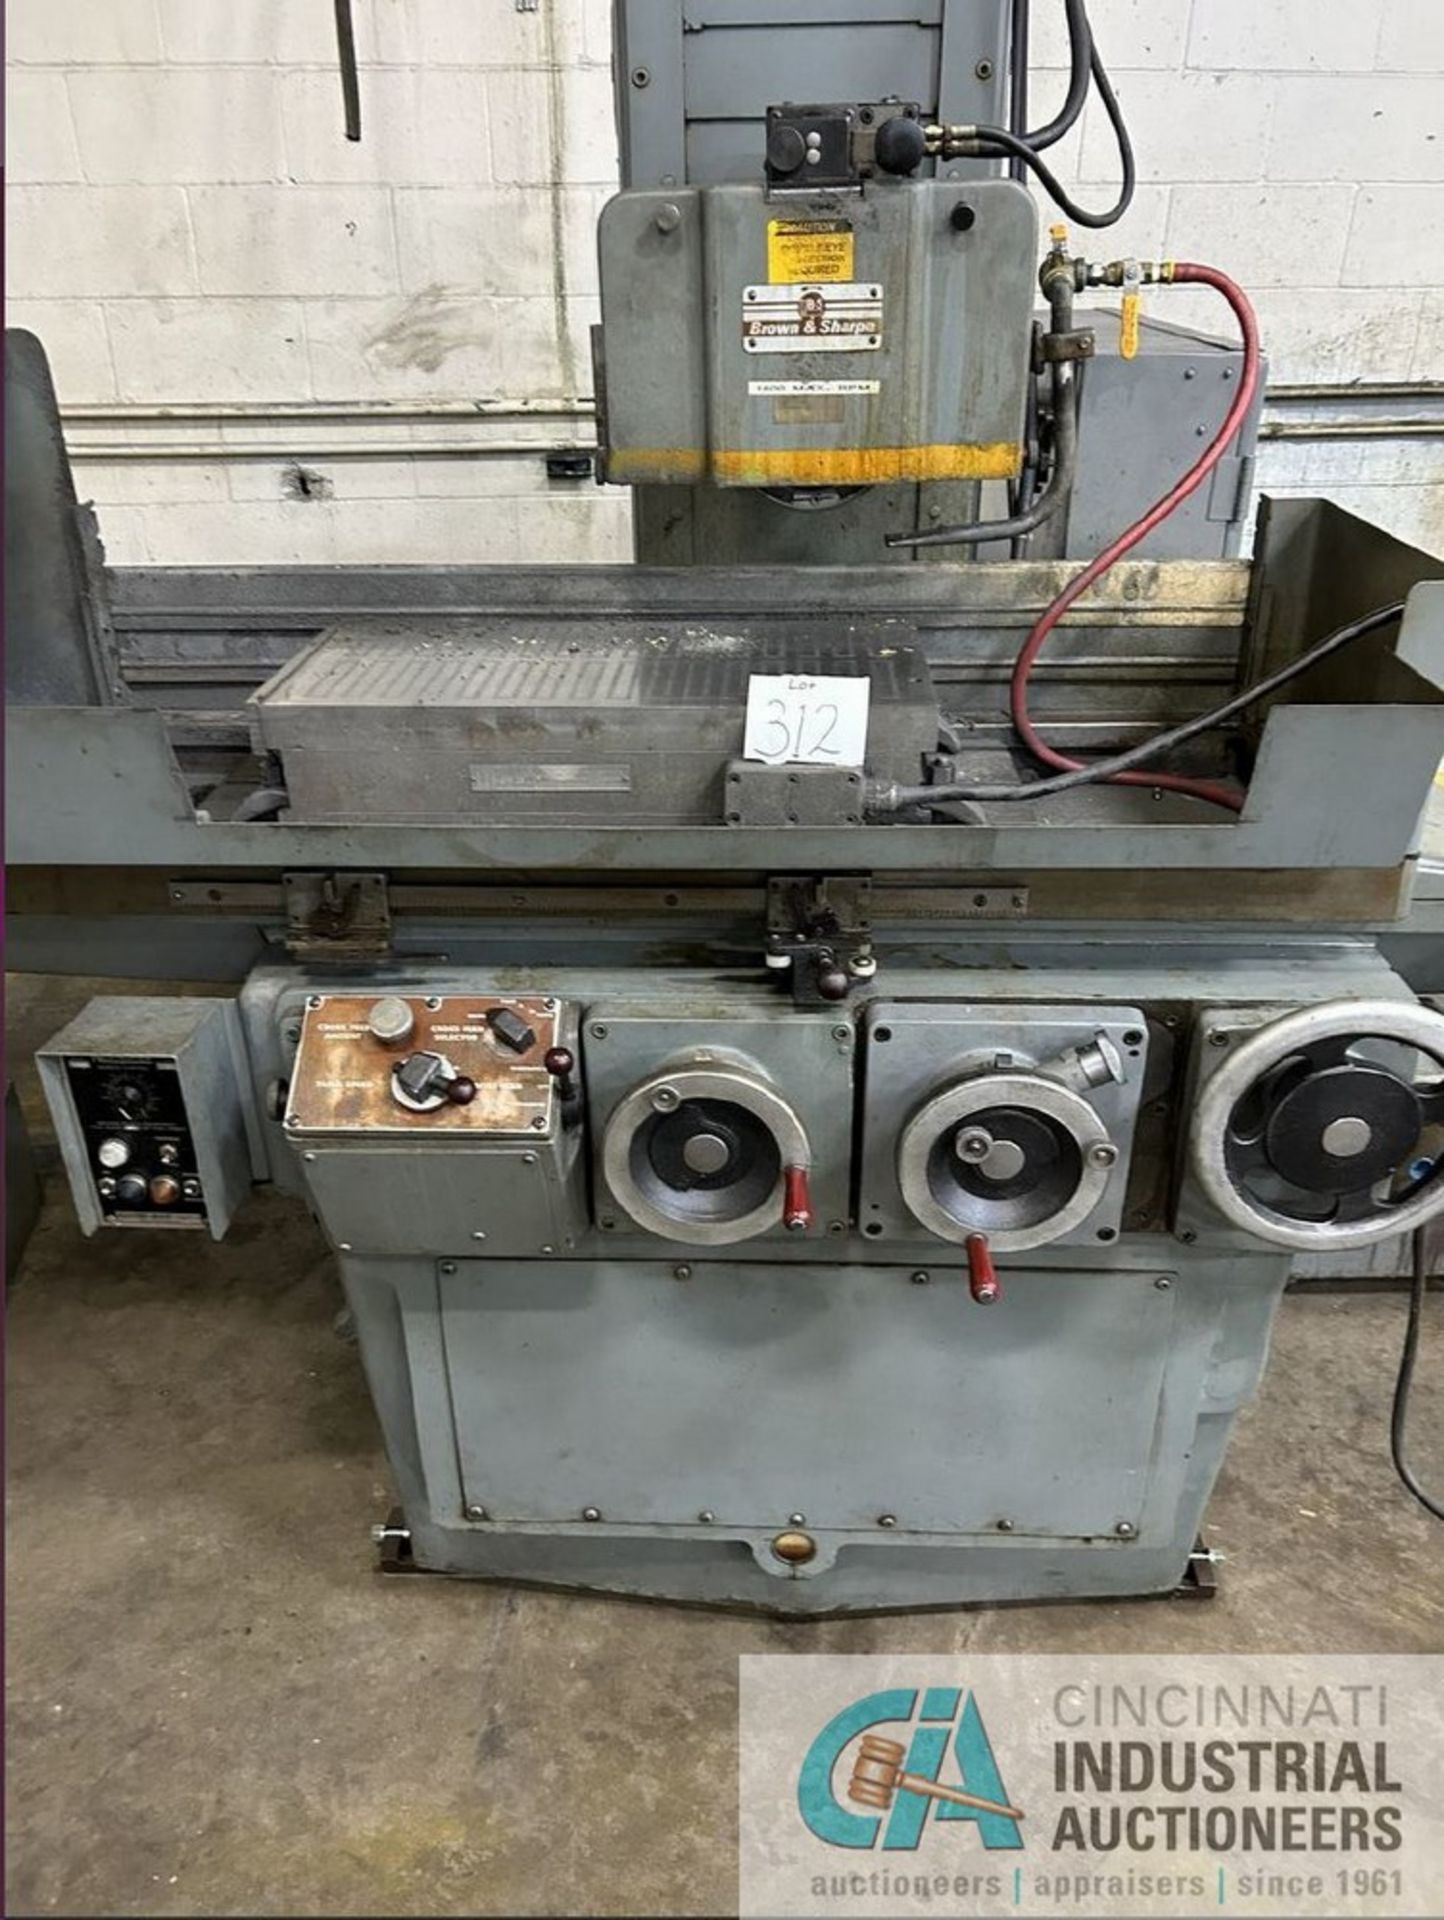 **12" X 24" BROWN & SHARPE 1224 SURFACE GRINDER - LOCATED AT 5932 JACKSON AVE., BERKELEY, MO 63134**